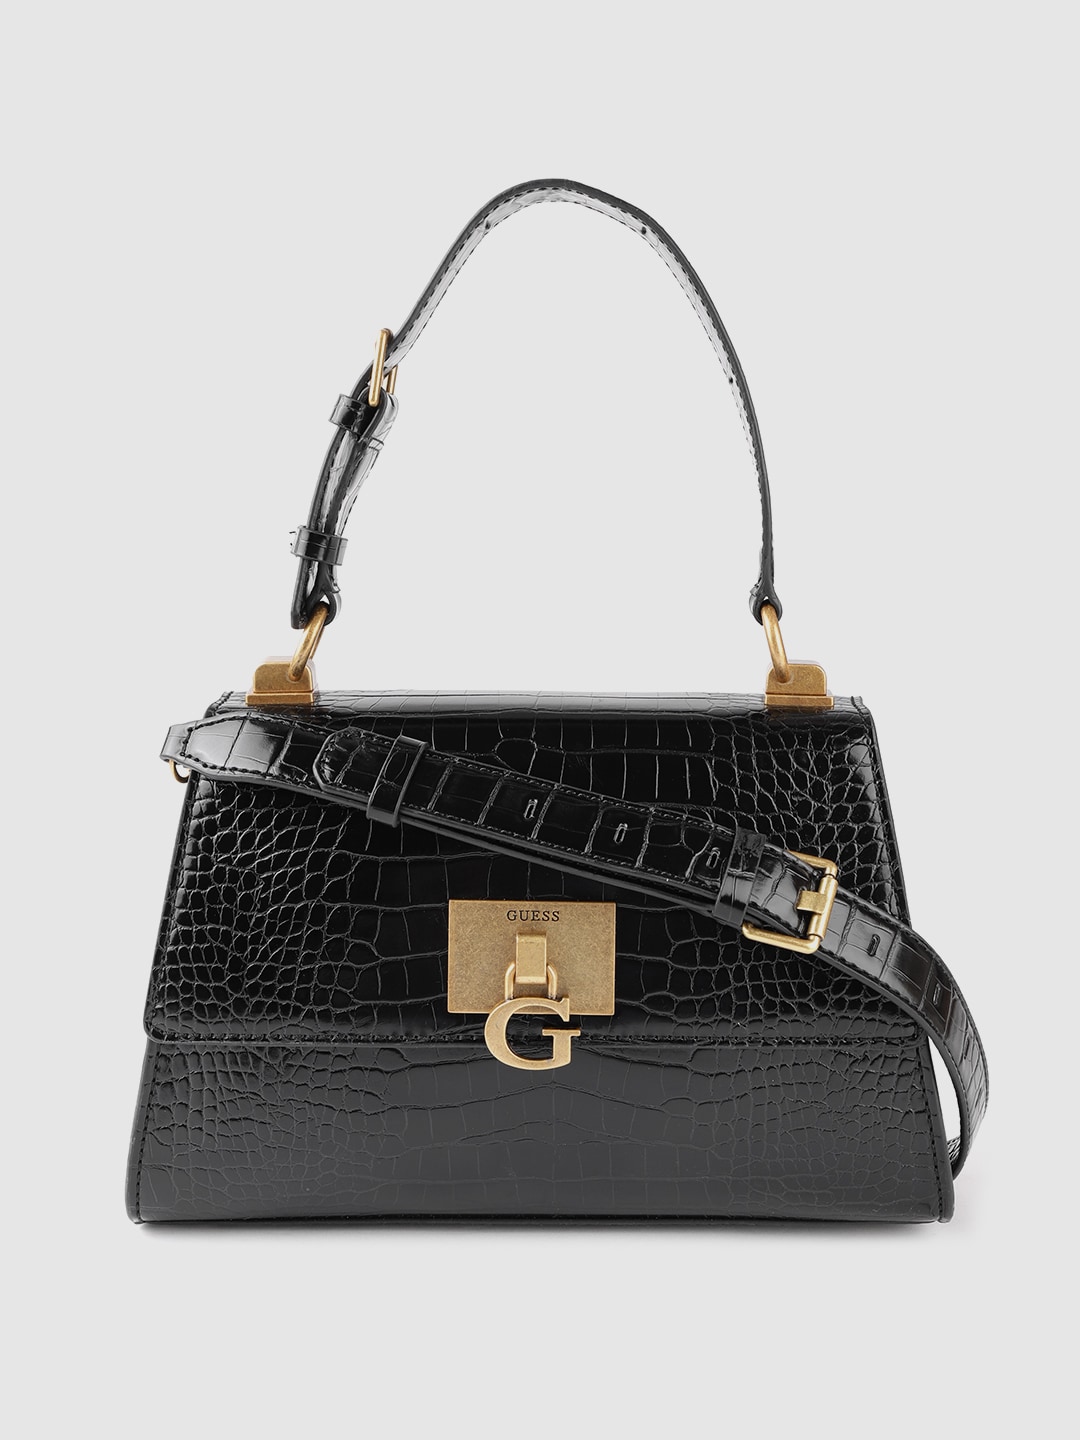 GUESS Black Croc Textured Structured Satchel with Detachable Sling Strap Price in India